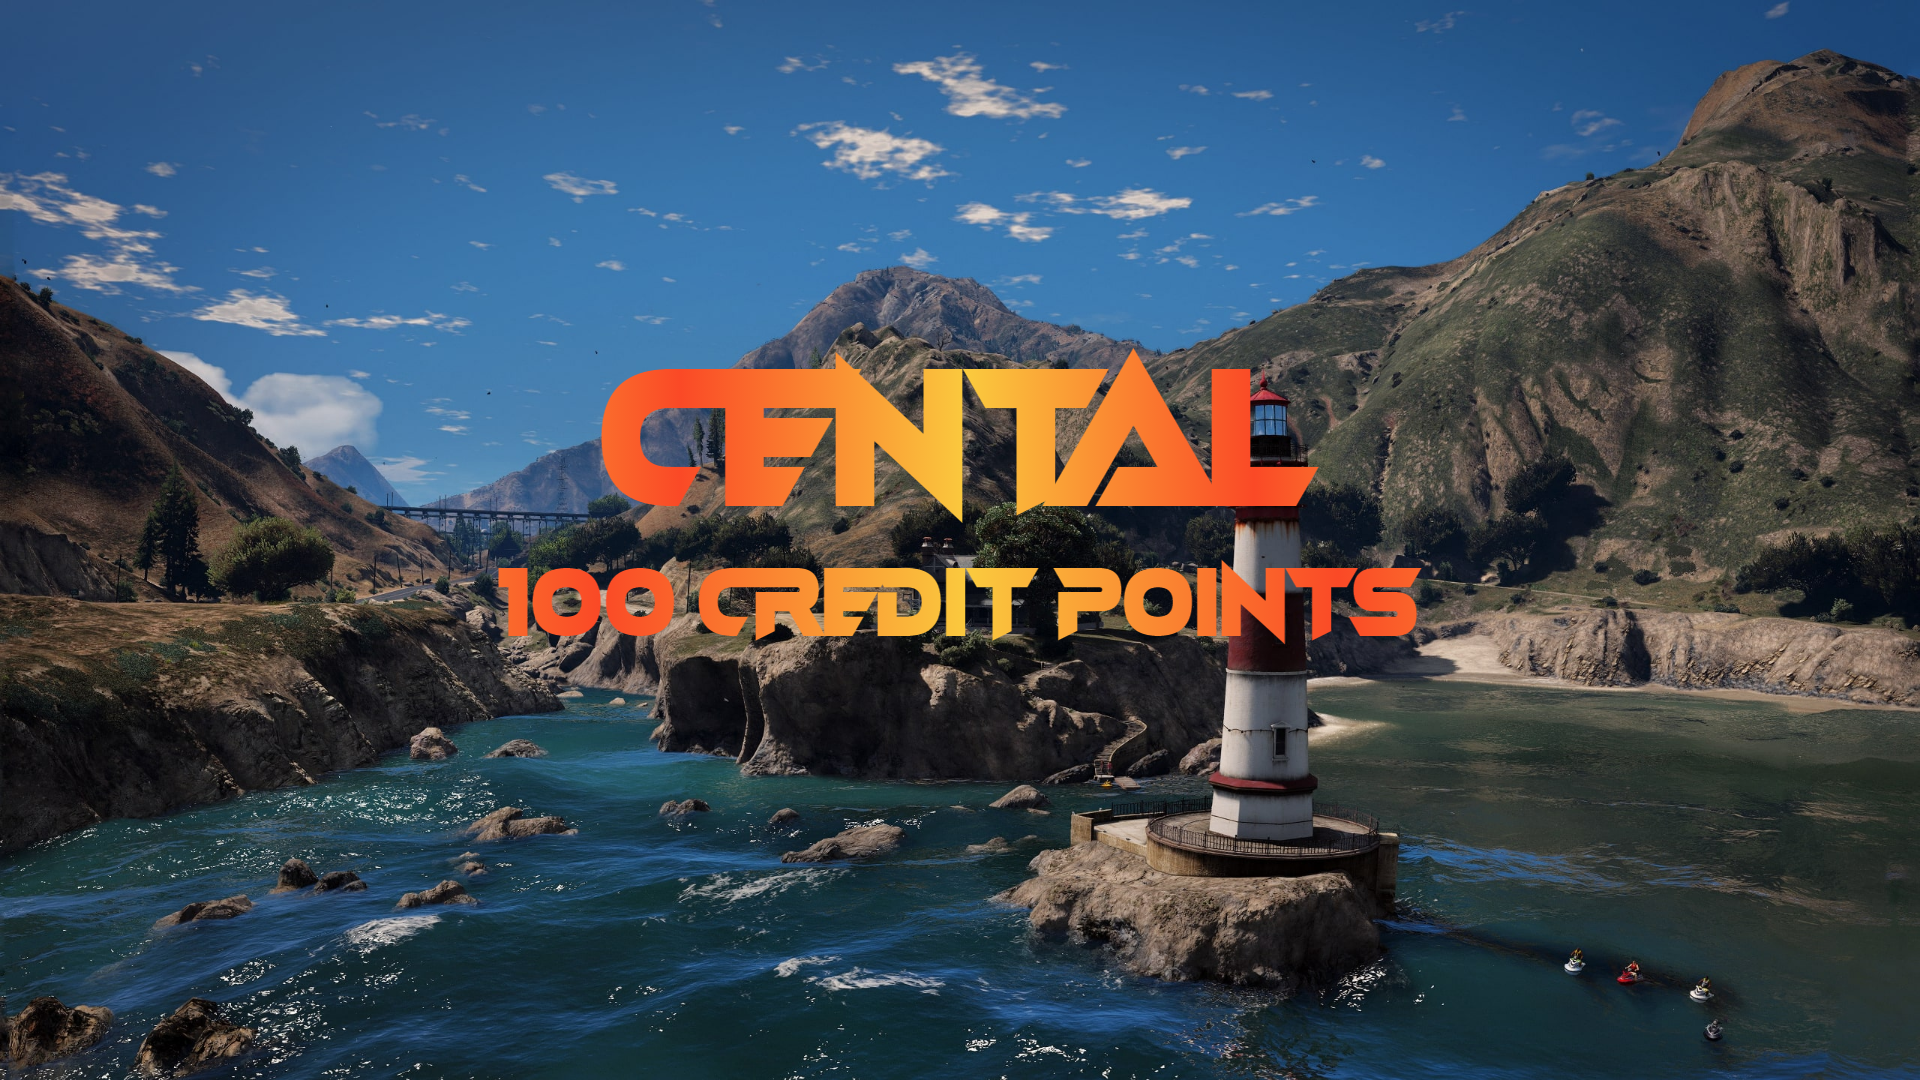 [$ 11.29] CentralRP - 100 Credit Points Gift Card